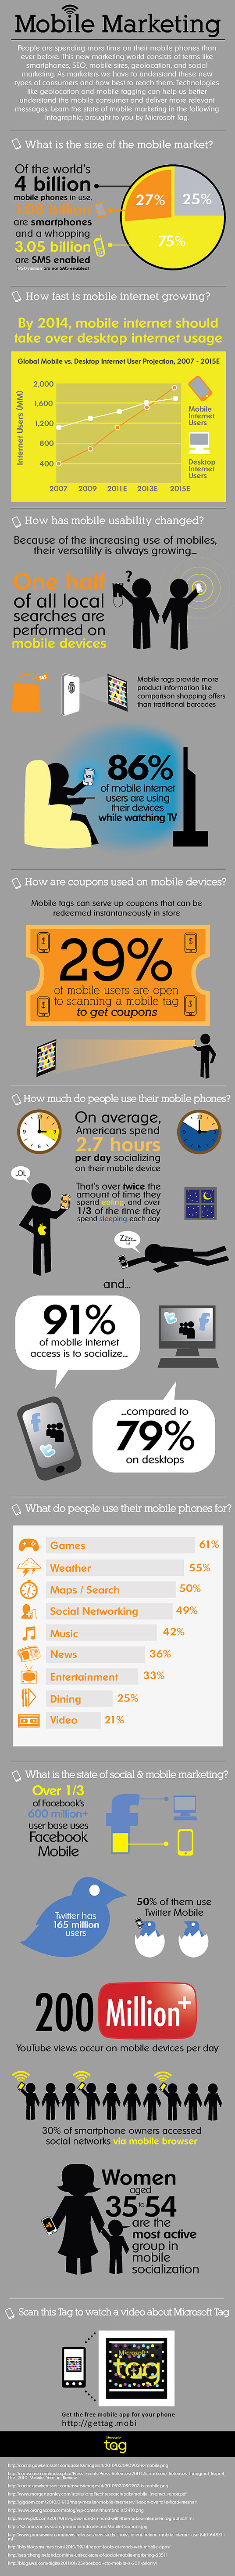 2011 Mobile Statistics Stats Facts Marketing - Infographic